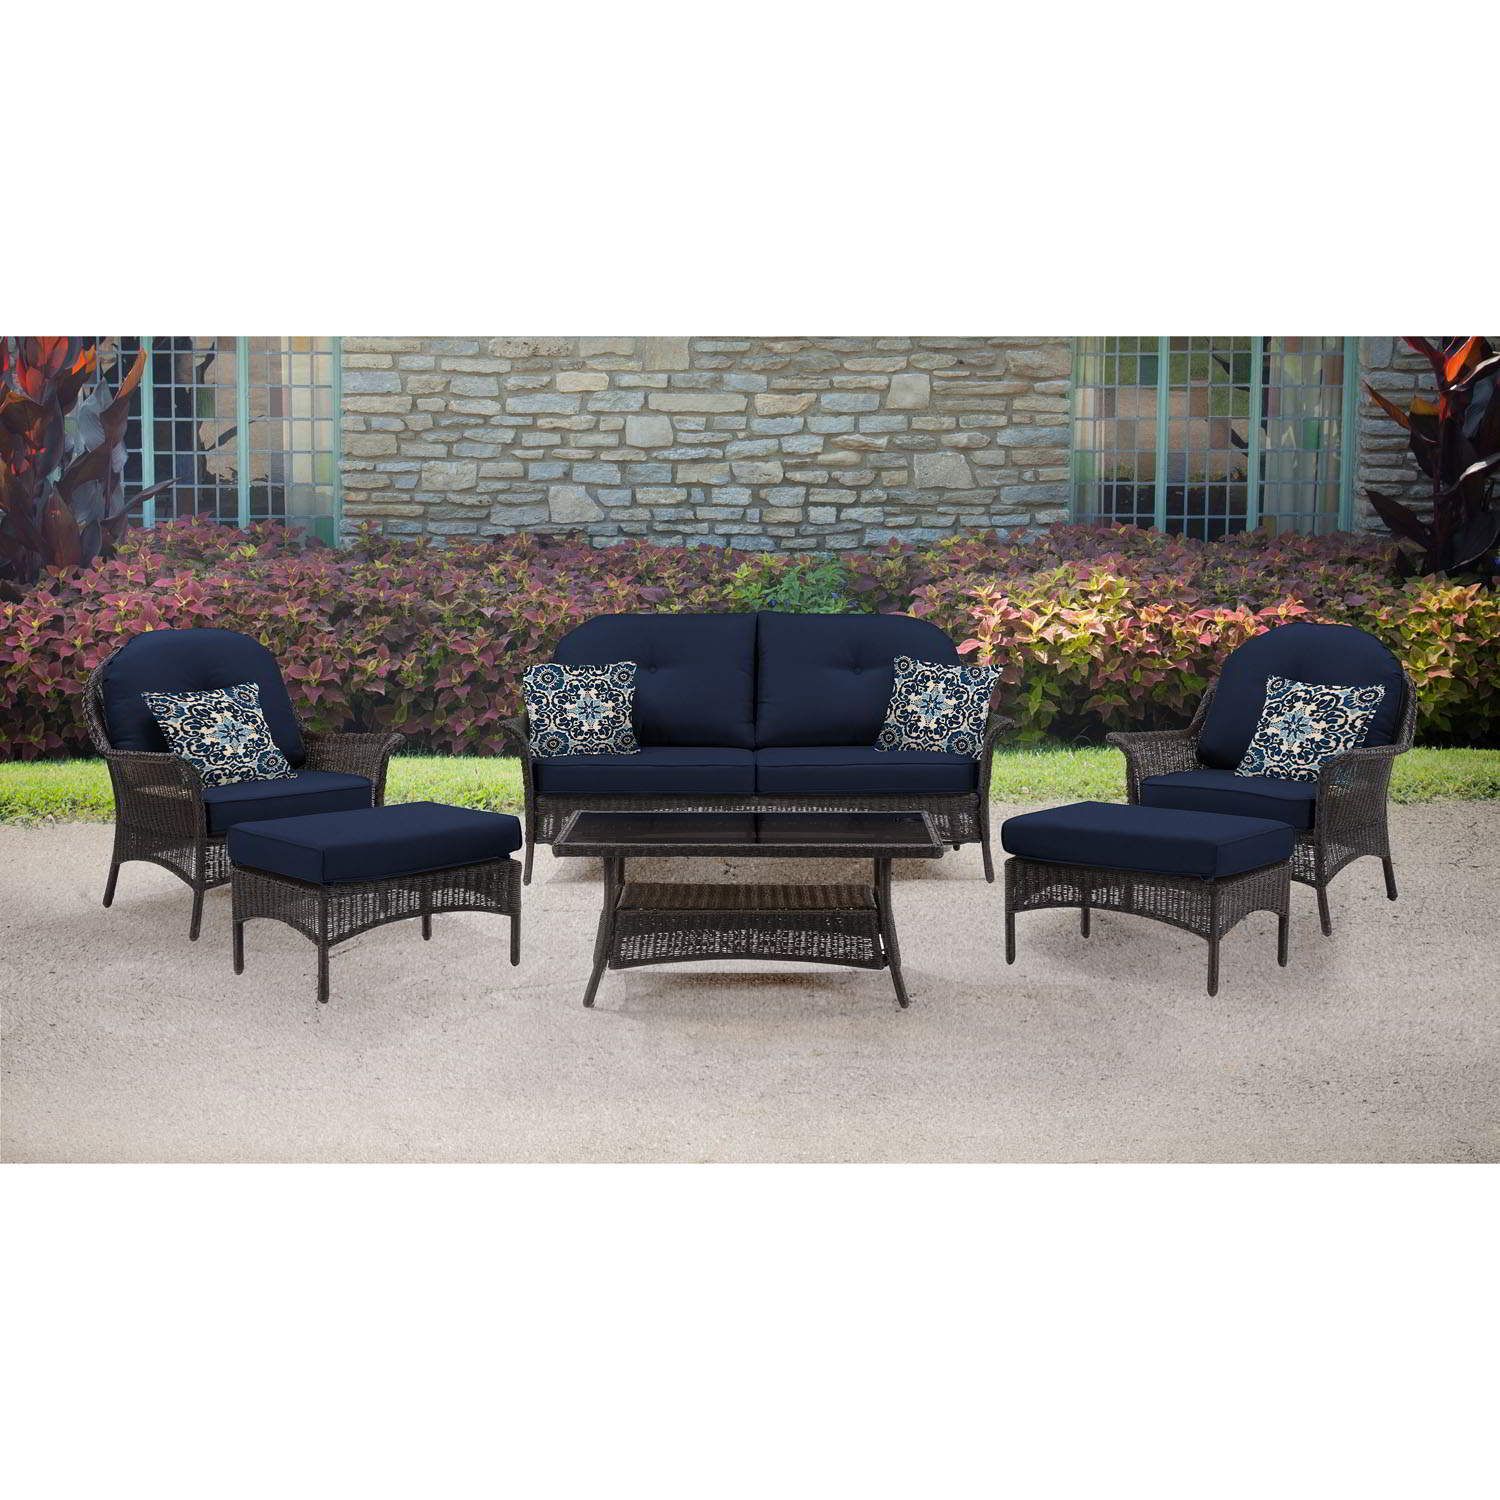 Hanover San Marino 6 Piece Patio Set In Navy Blue, Smar 6Pc Nvy (With In Navy Outdoor Seating Sectional Patio Sets (View 5 of 15)